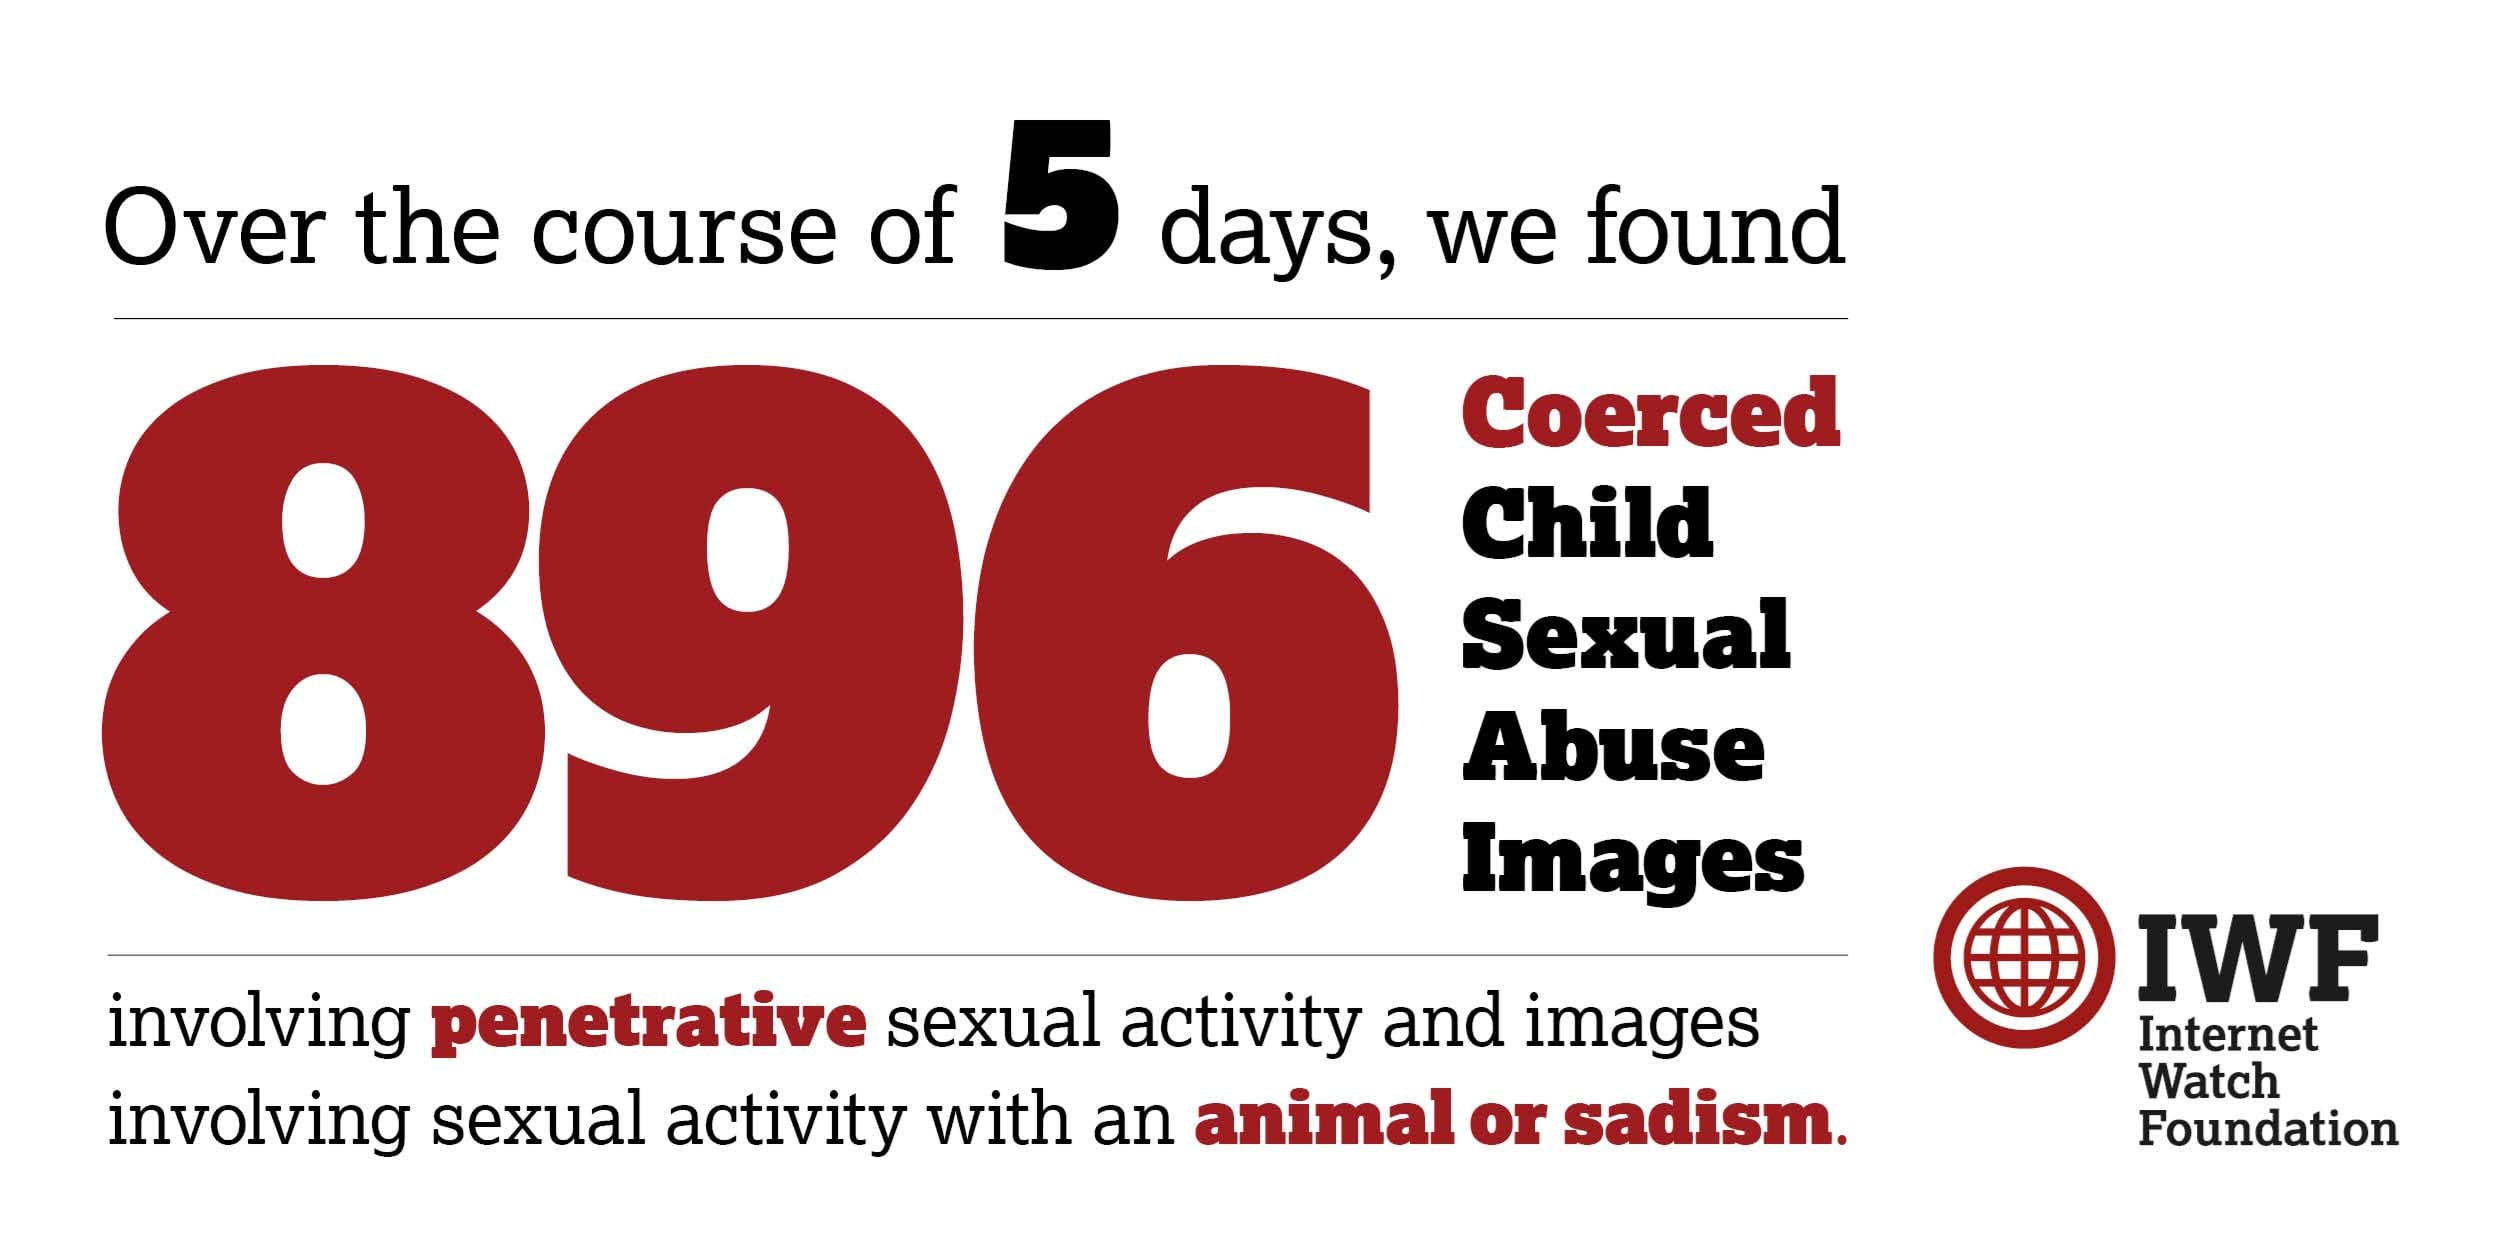 Statistic image showing that over the course of 5 days, we found 896 coerced child sexual abuse images involving penetrative sexual activity and images involving sexual activity with an animal or sadism